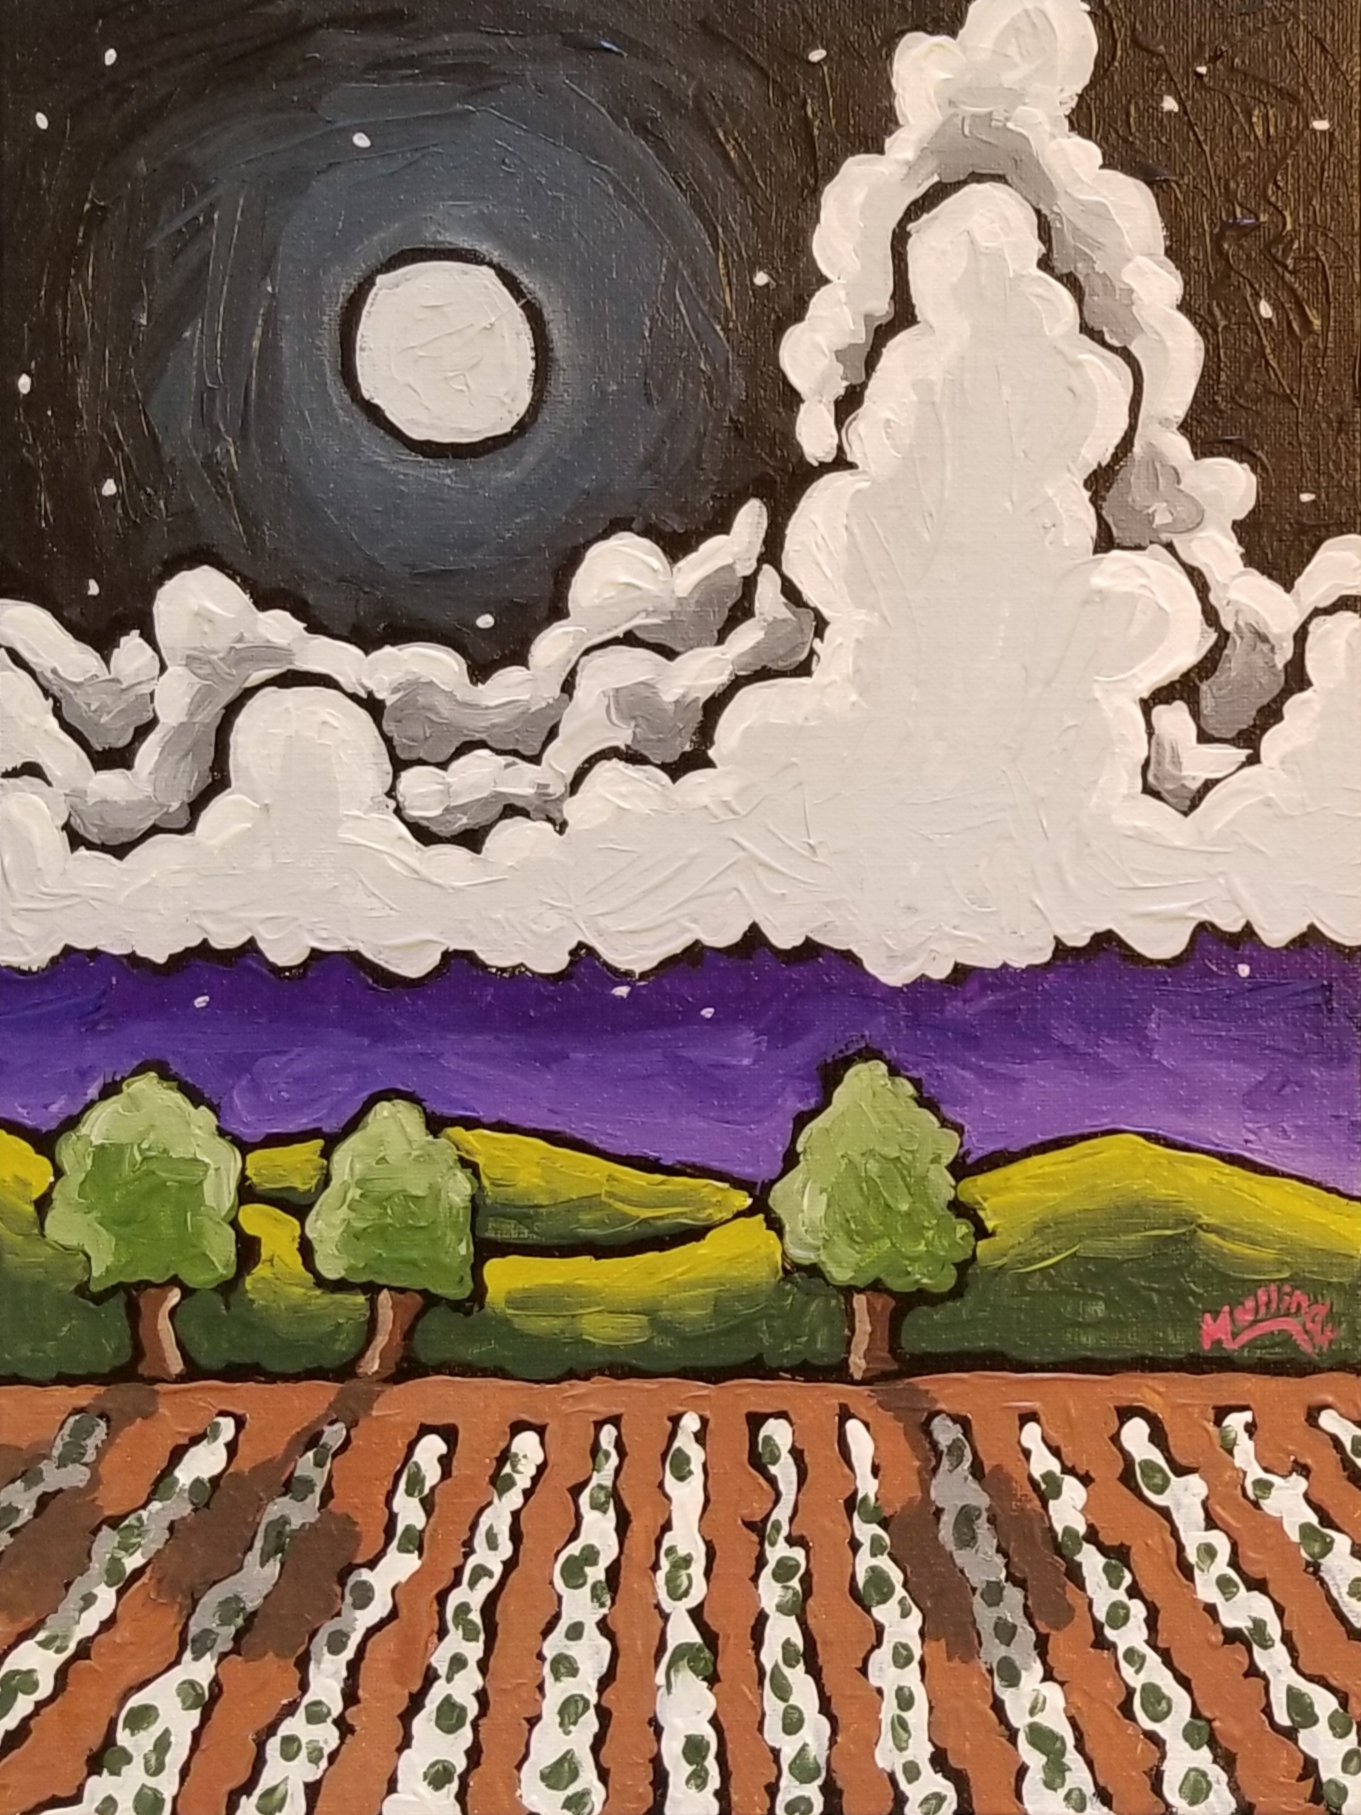 Cotton Field with a Purple Sky | Painting by Kent Mullinax of Cartersville, Georgia